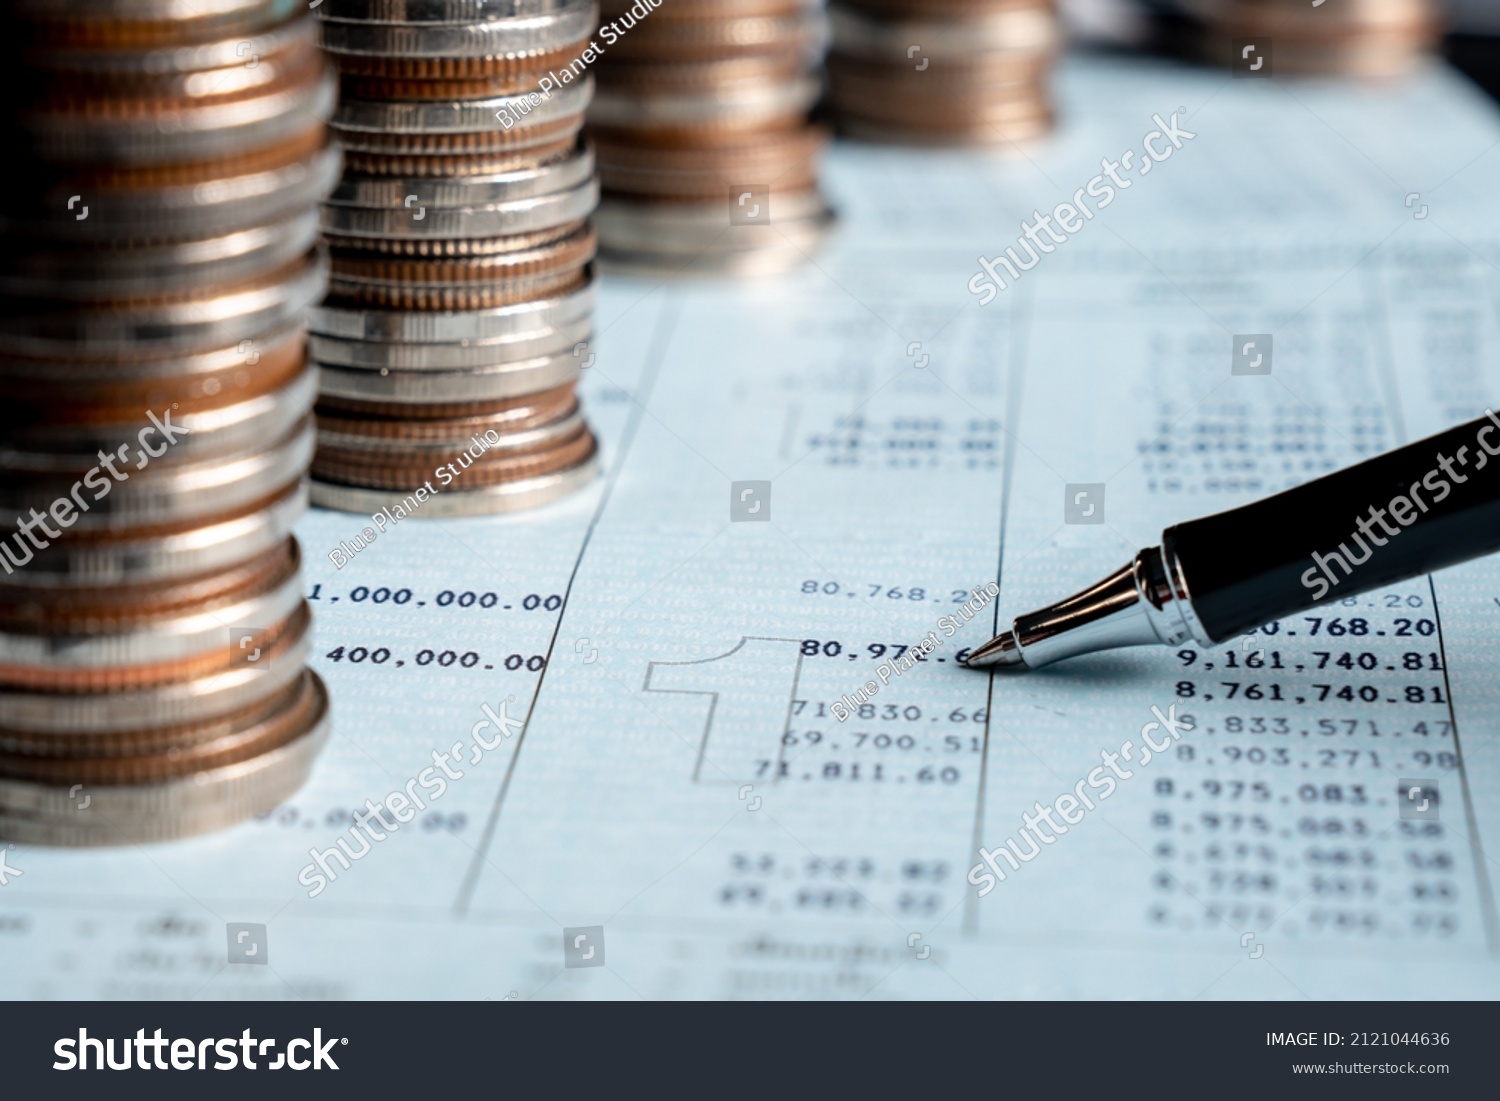 Pile of gold coins money stack in finance treasury deposit bank account saving . Concept of corporate business economy and financial growth by investment in valuable asset to gain cash revenue . #2121044636